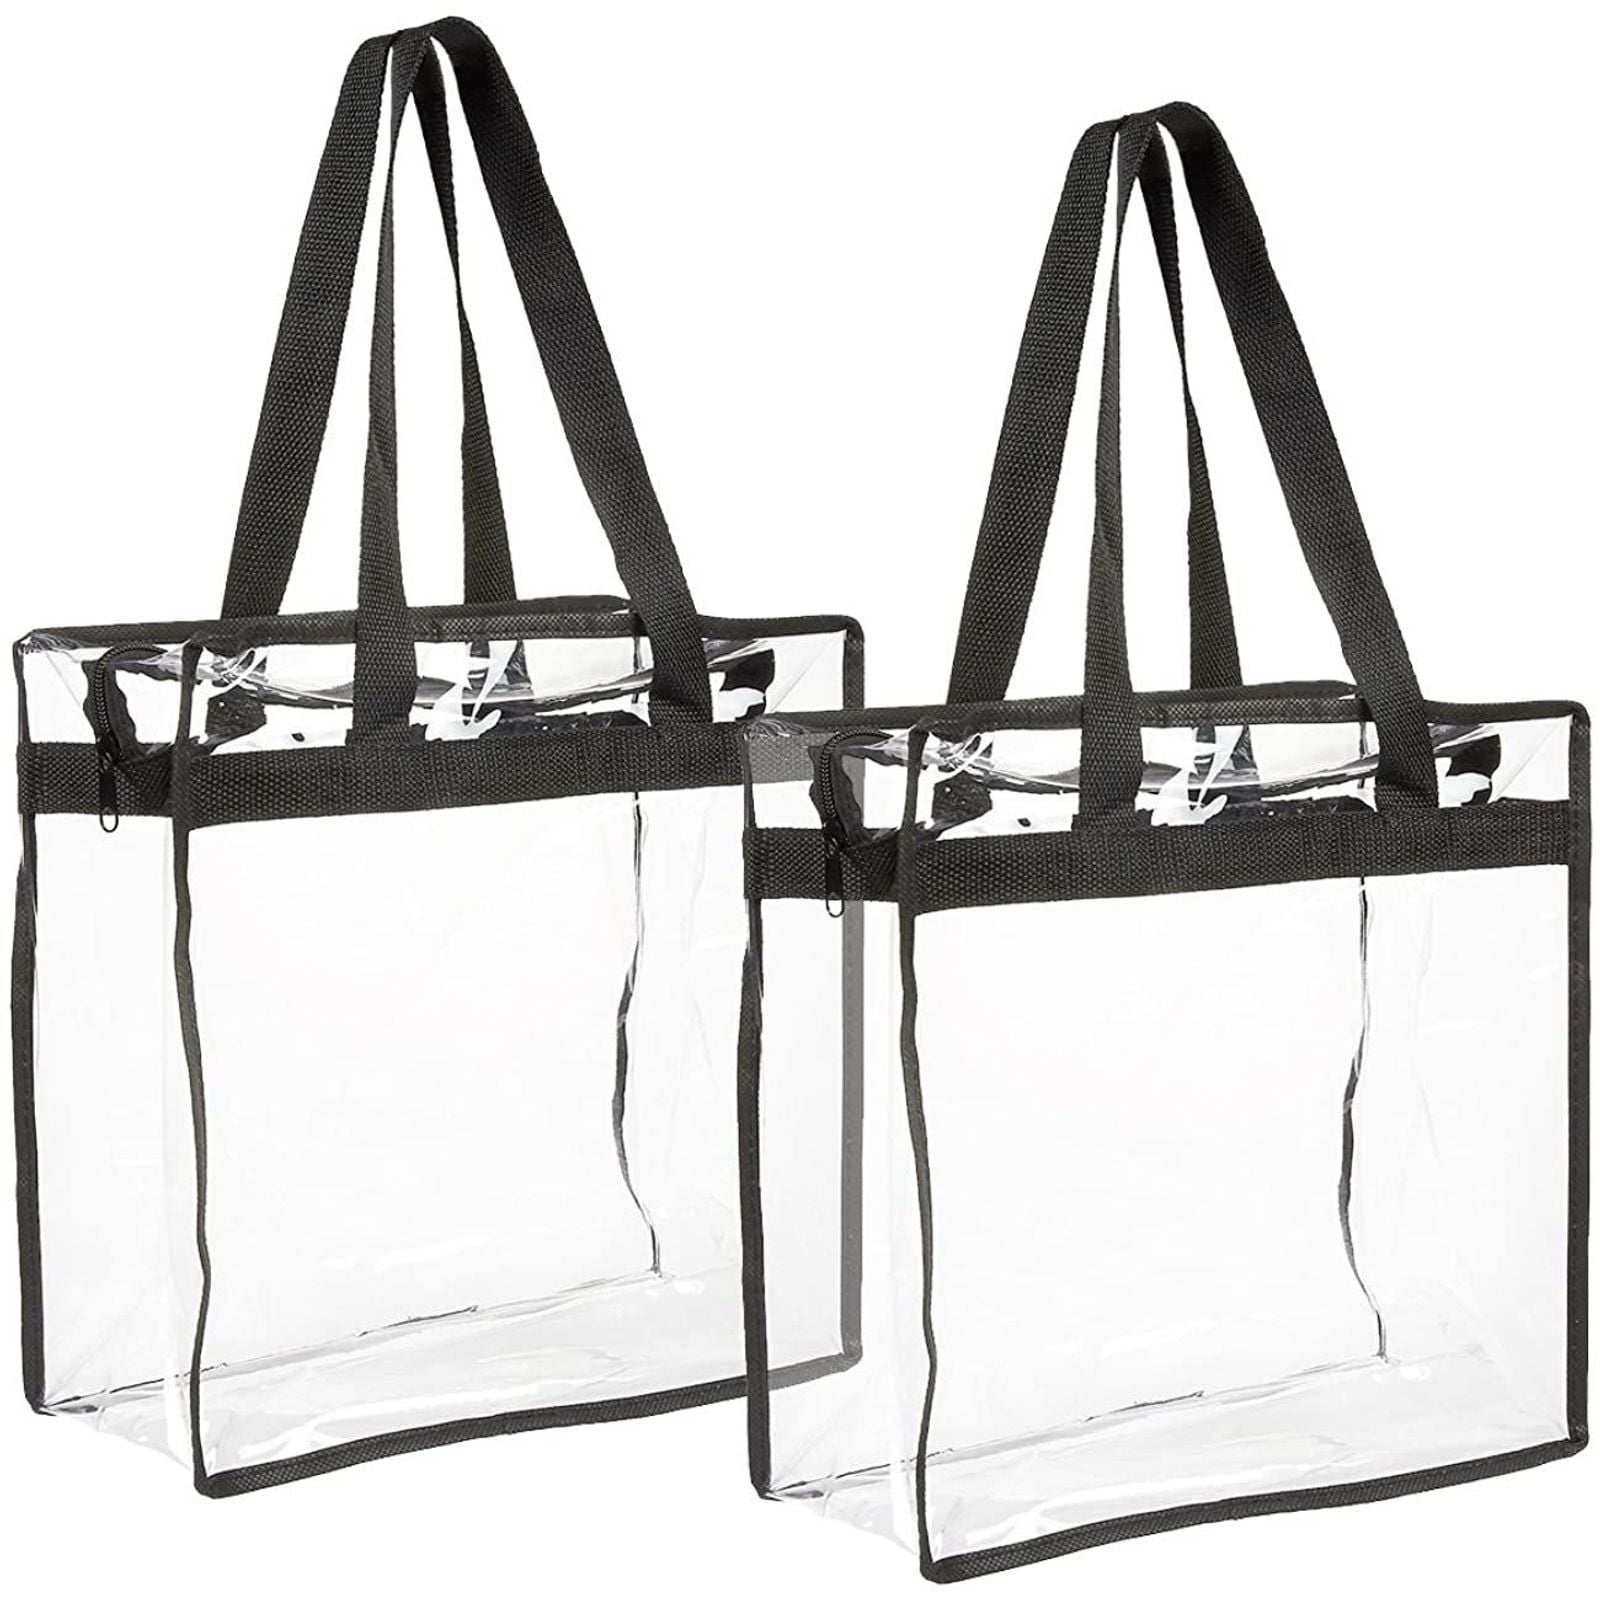 2 Pack Stadium Approved Clear Tote Bags 12x6x12 Large Plastic Beach Bags  with Handles  Walmartcom